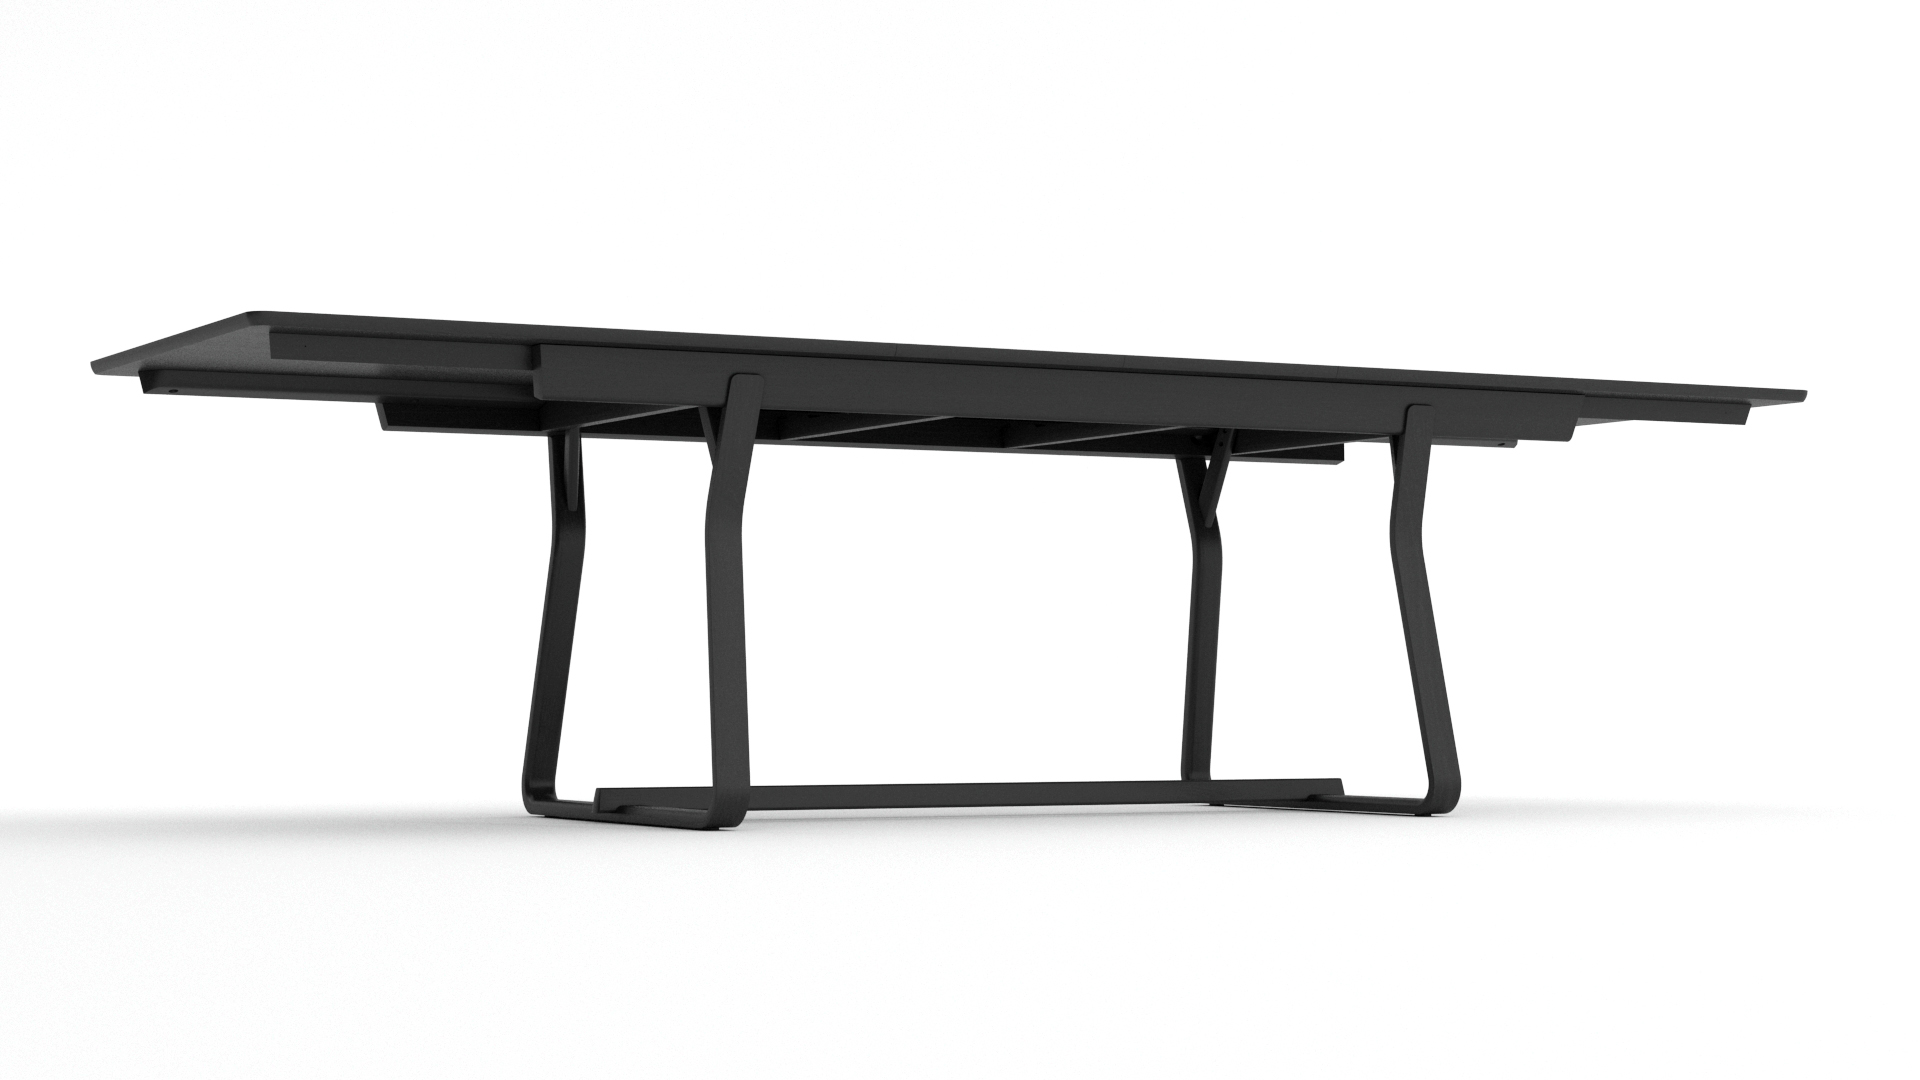 Black wooden extending table for an office